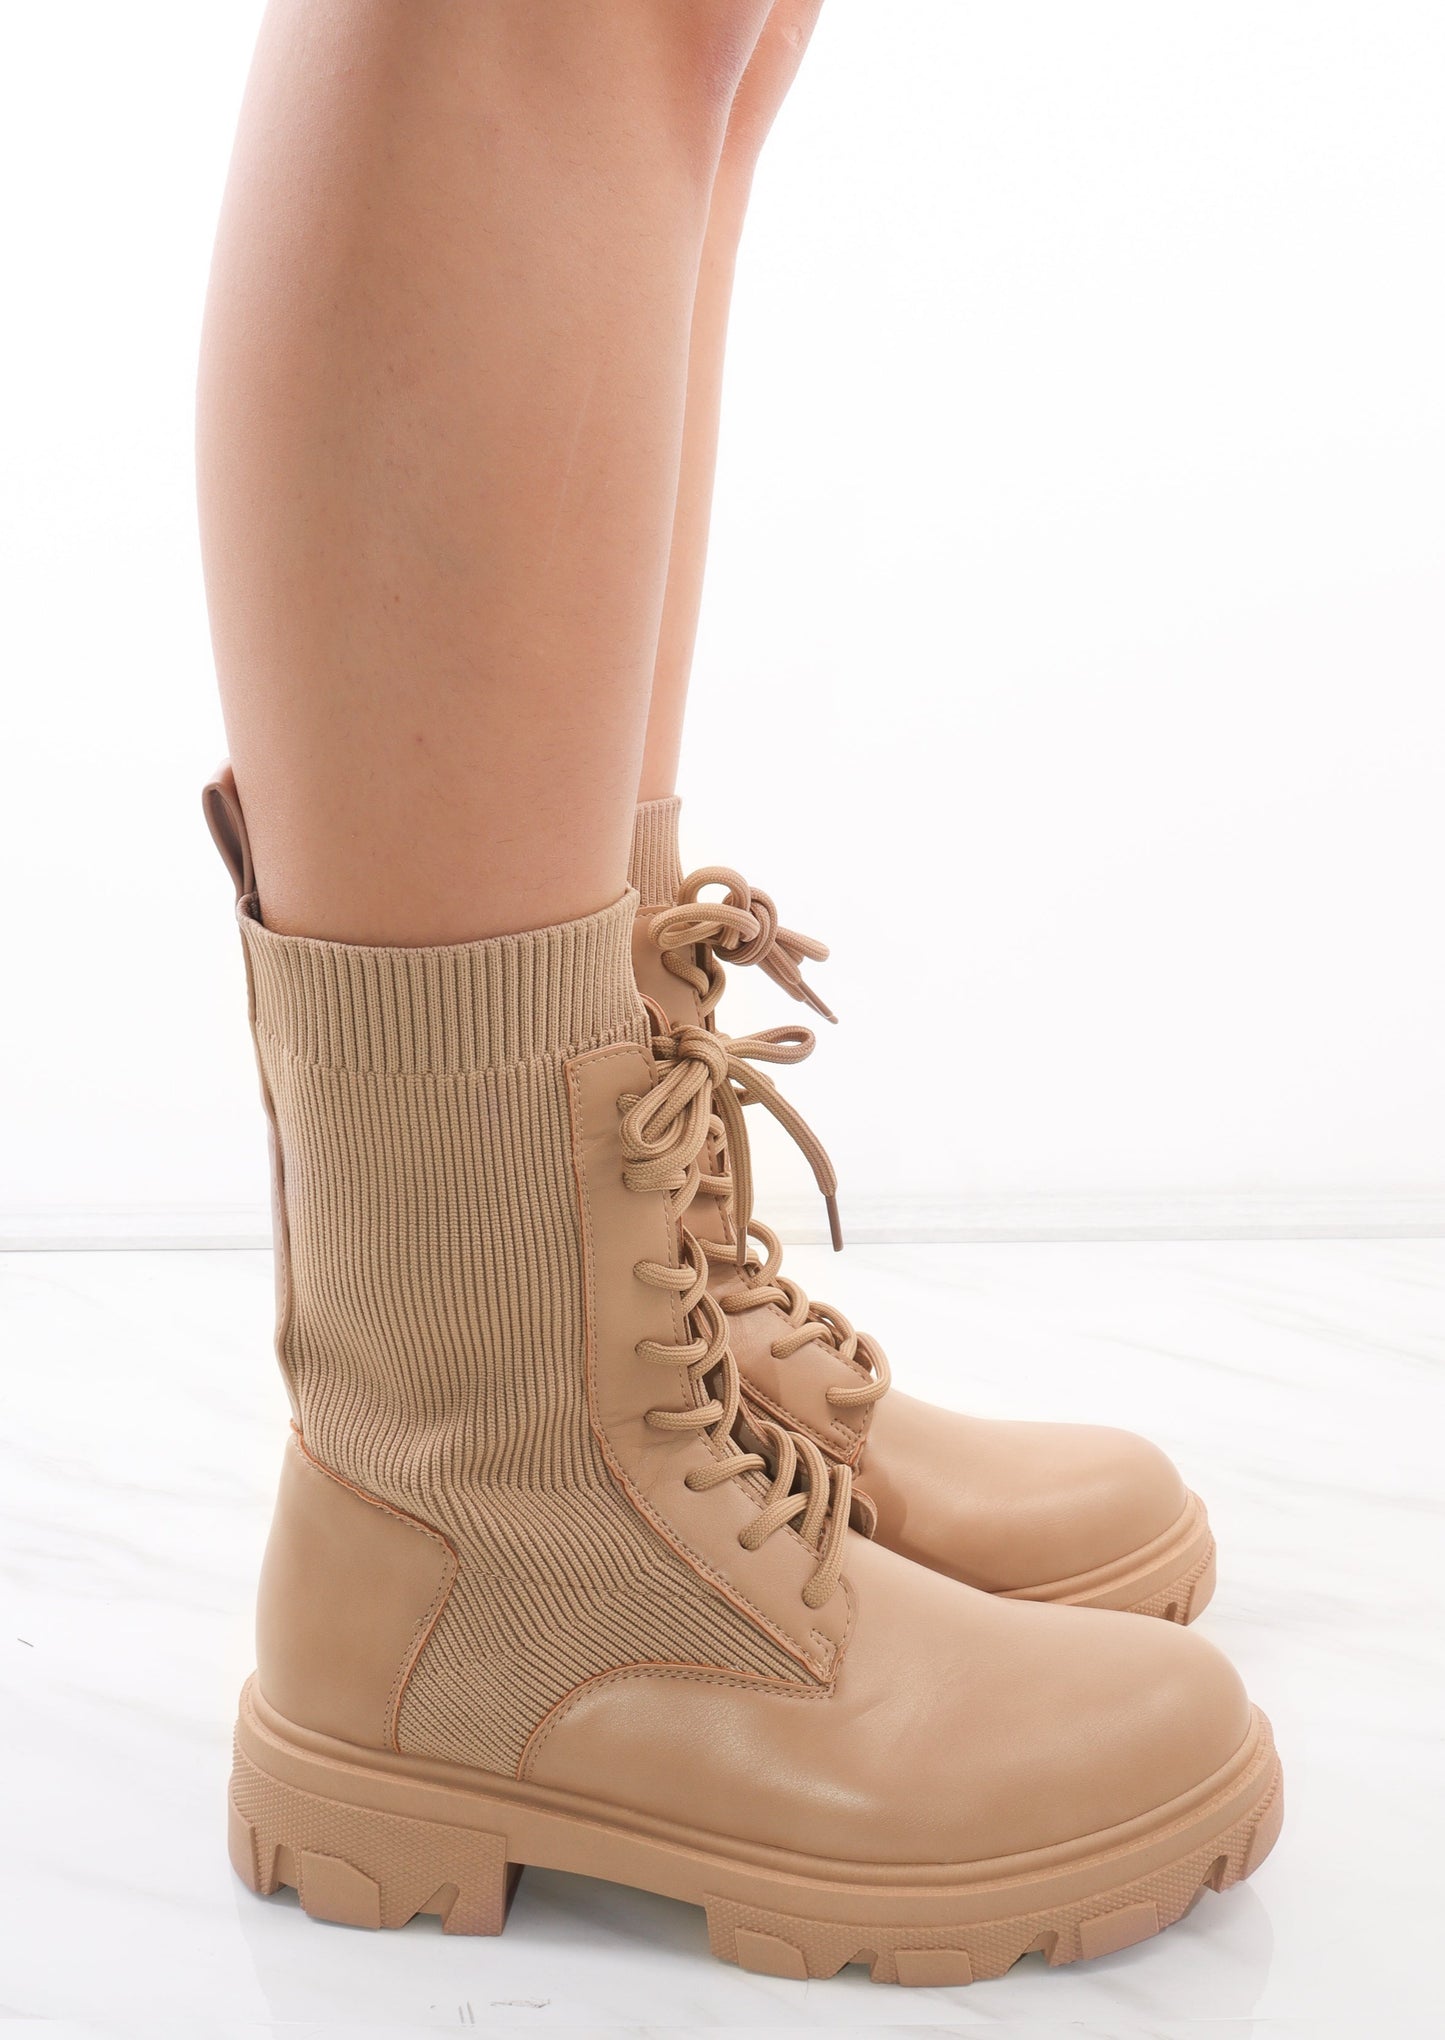 Load image into Gallery viewer, Beige Lace Up Faux Leather Sock Boots
